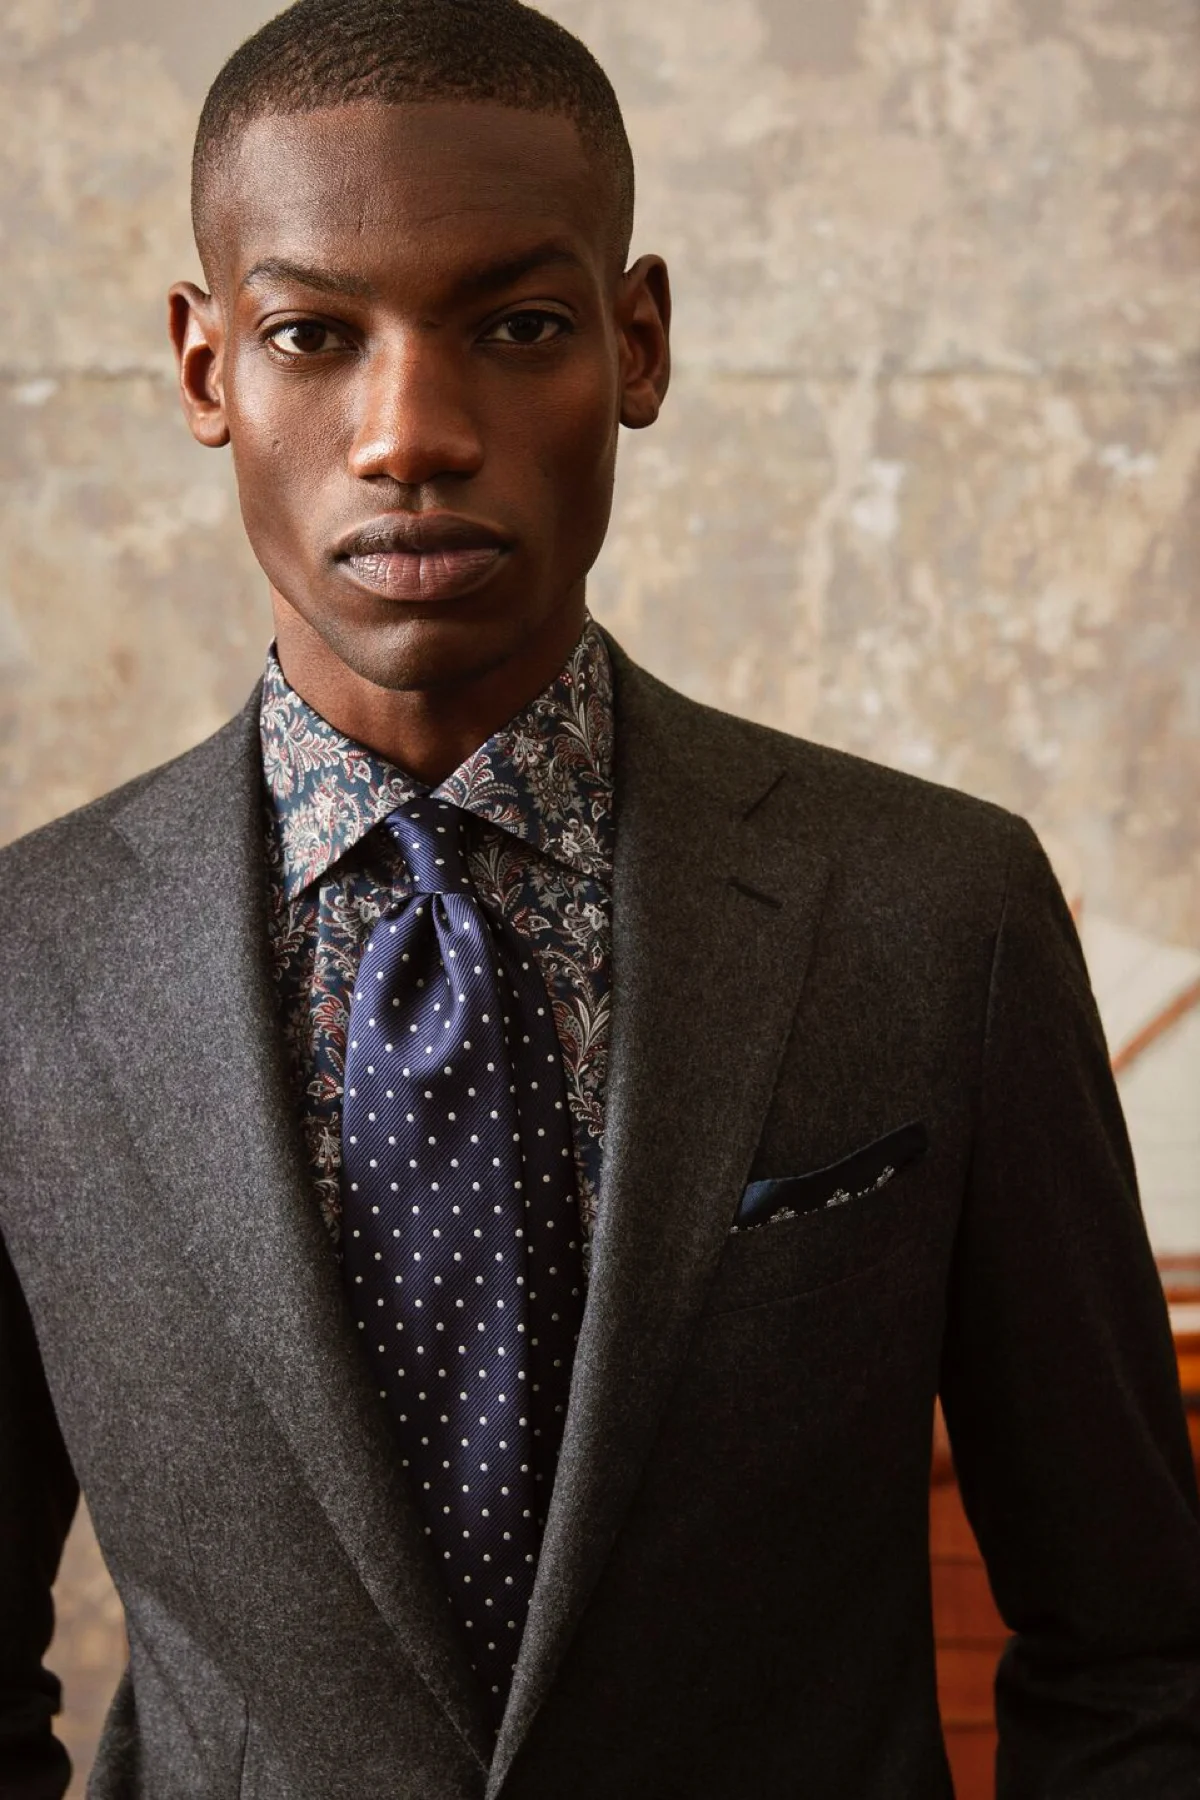 paisley shirt with suit on model